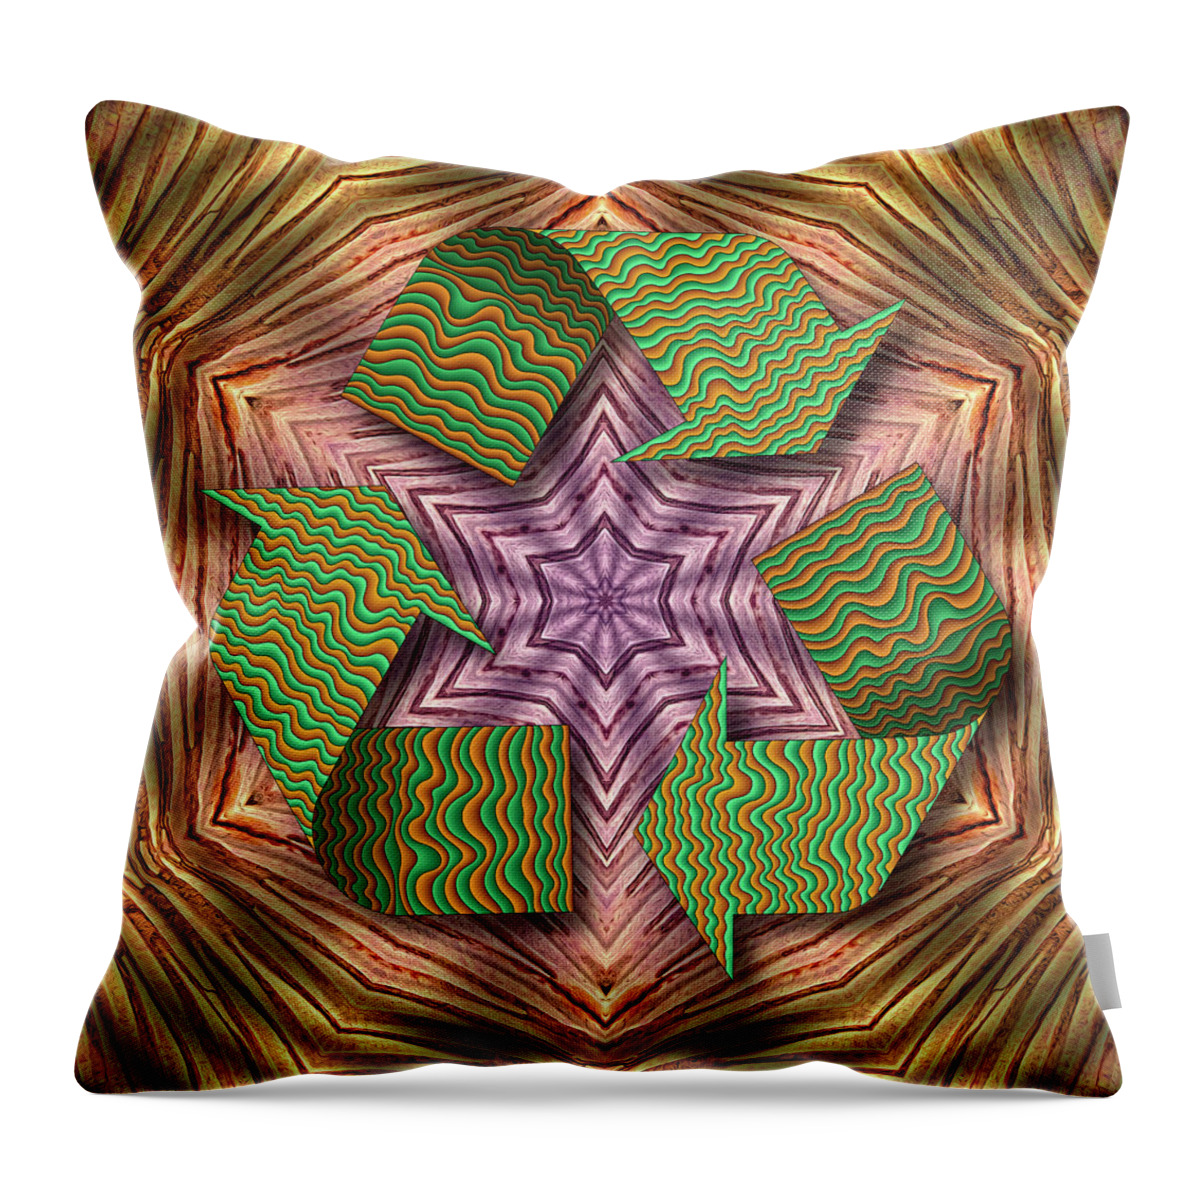 Recycling Mandala Throw Pillow featuring the digital art Restless Ripples by Becky Titus